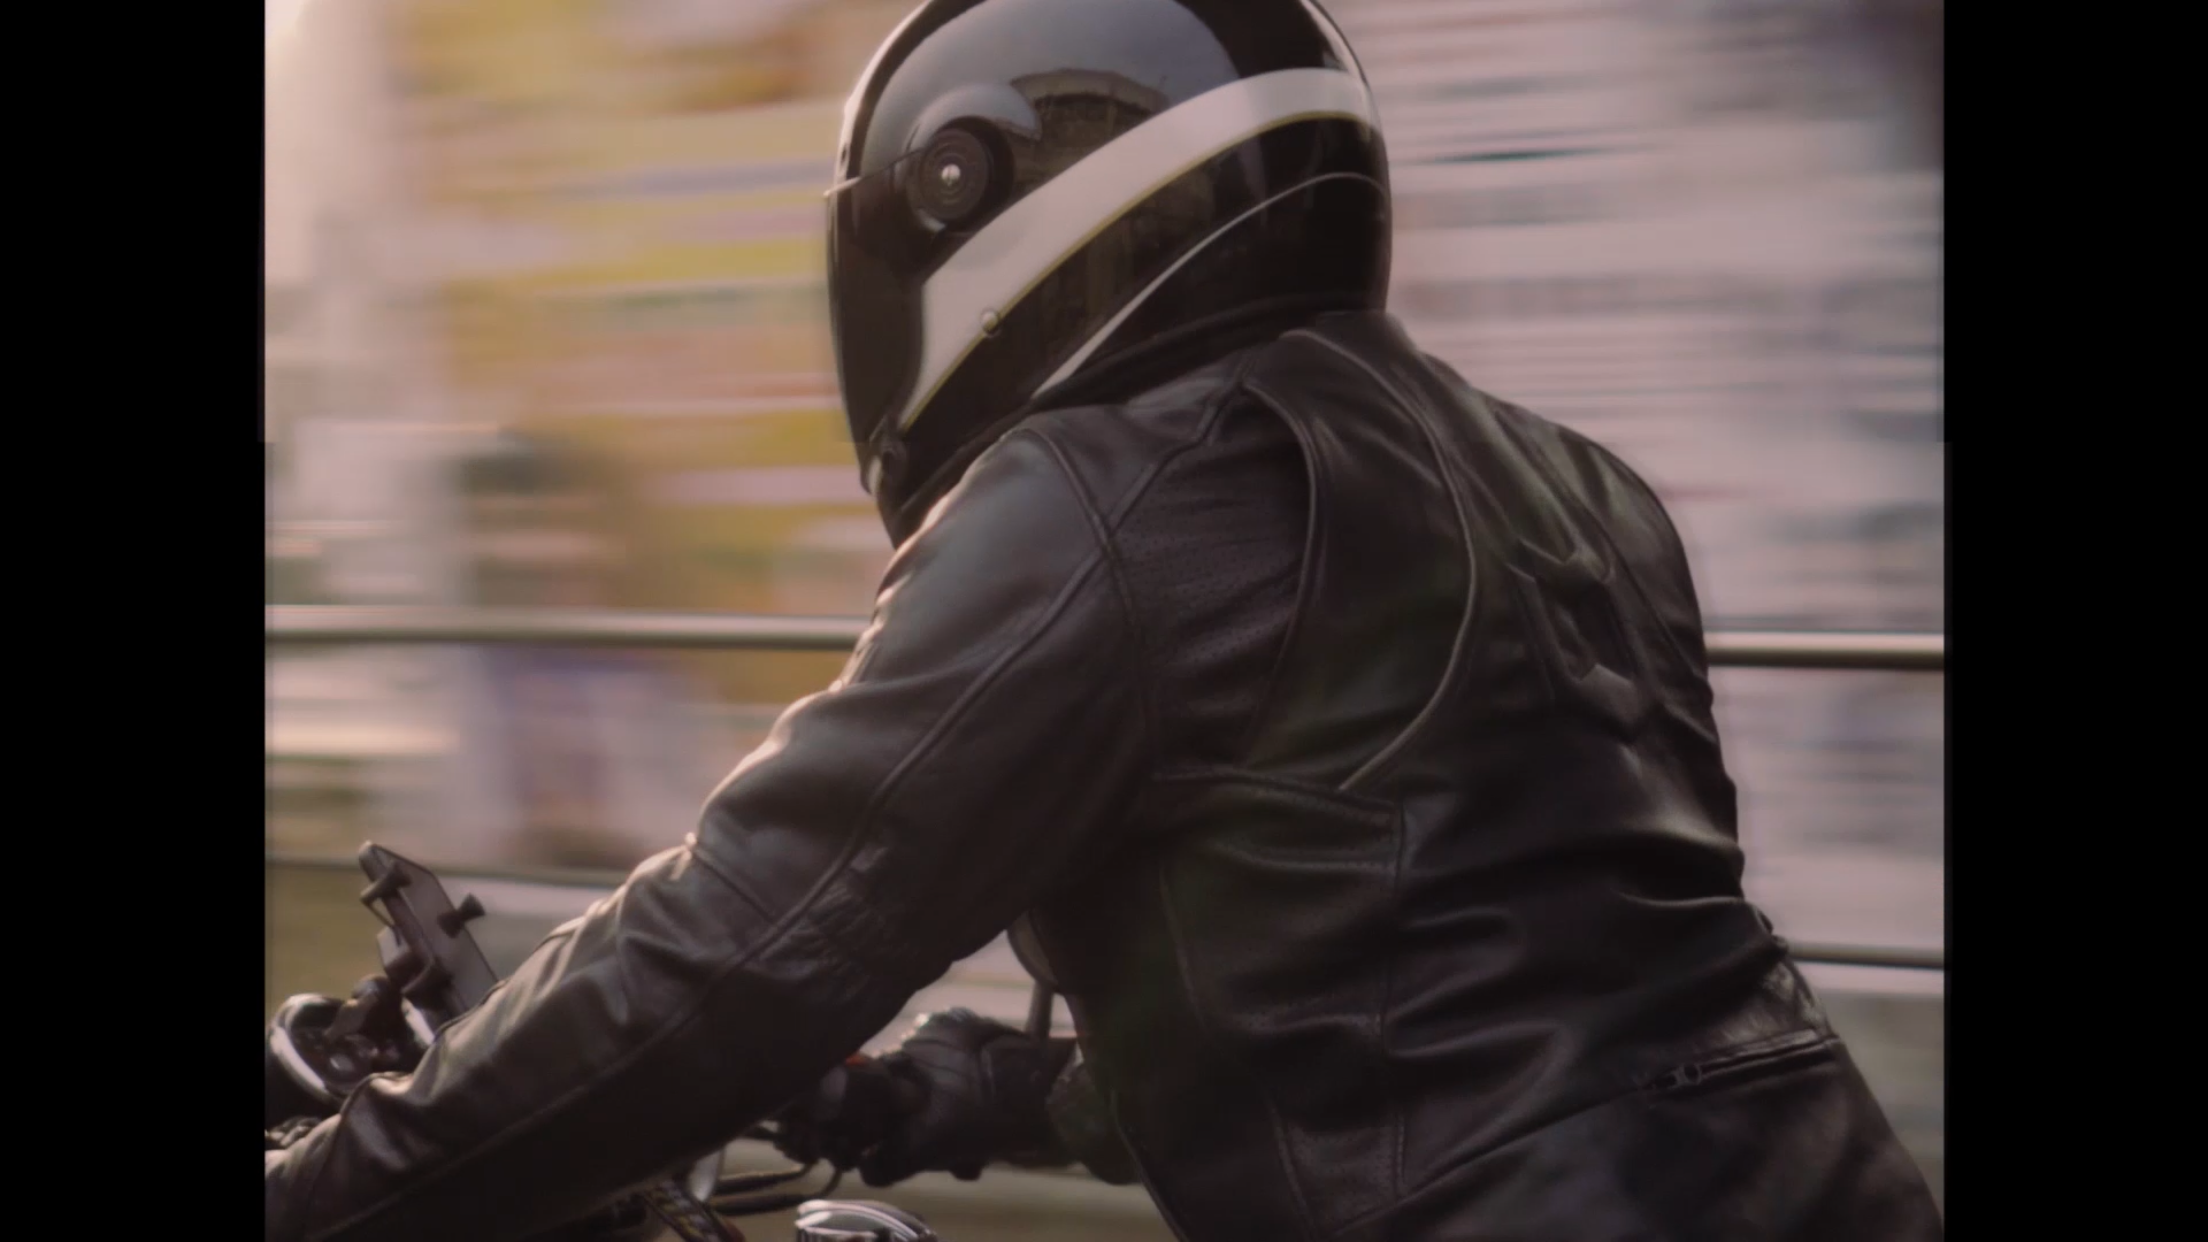 Load video: Airborne, is our take on the cafe racer culture. Leather jackets, custom motorcycles &amp; a free spirit.